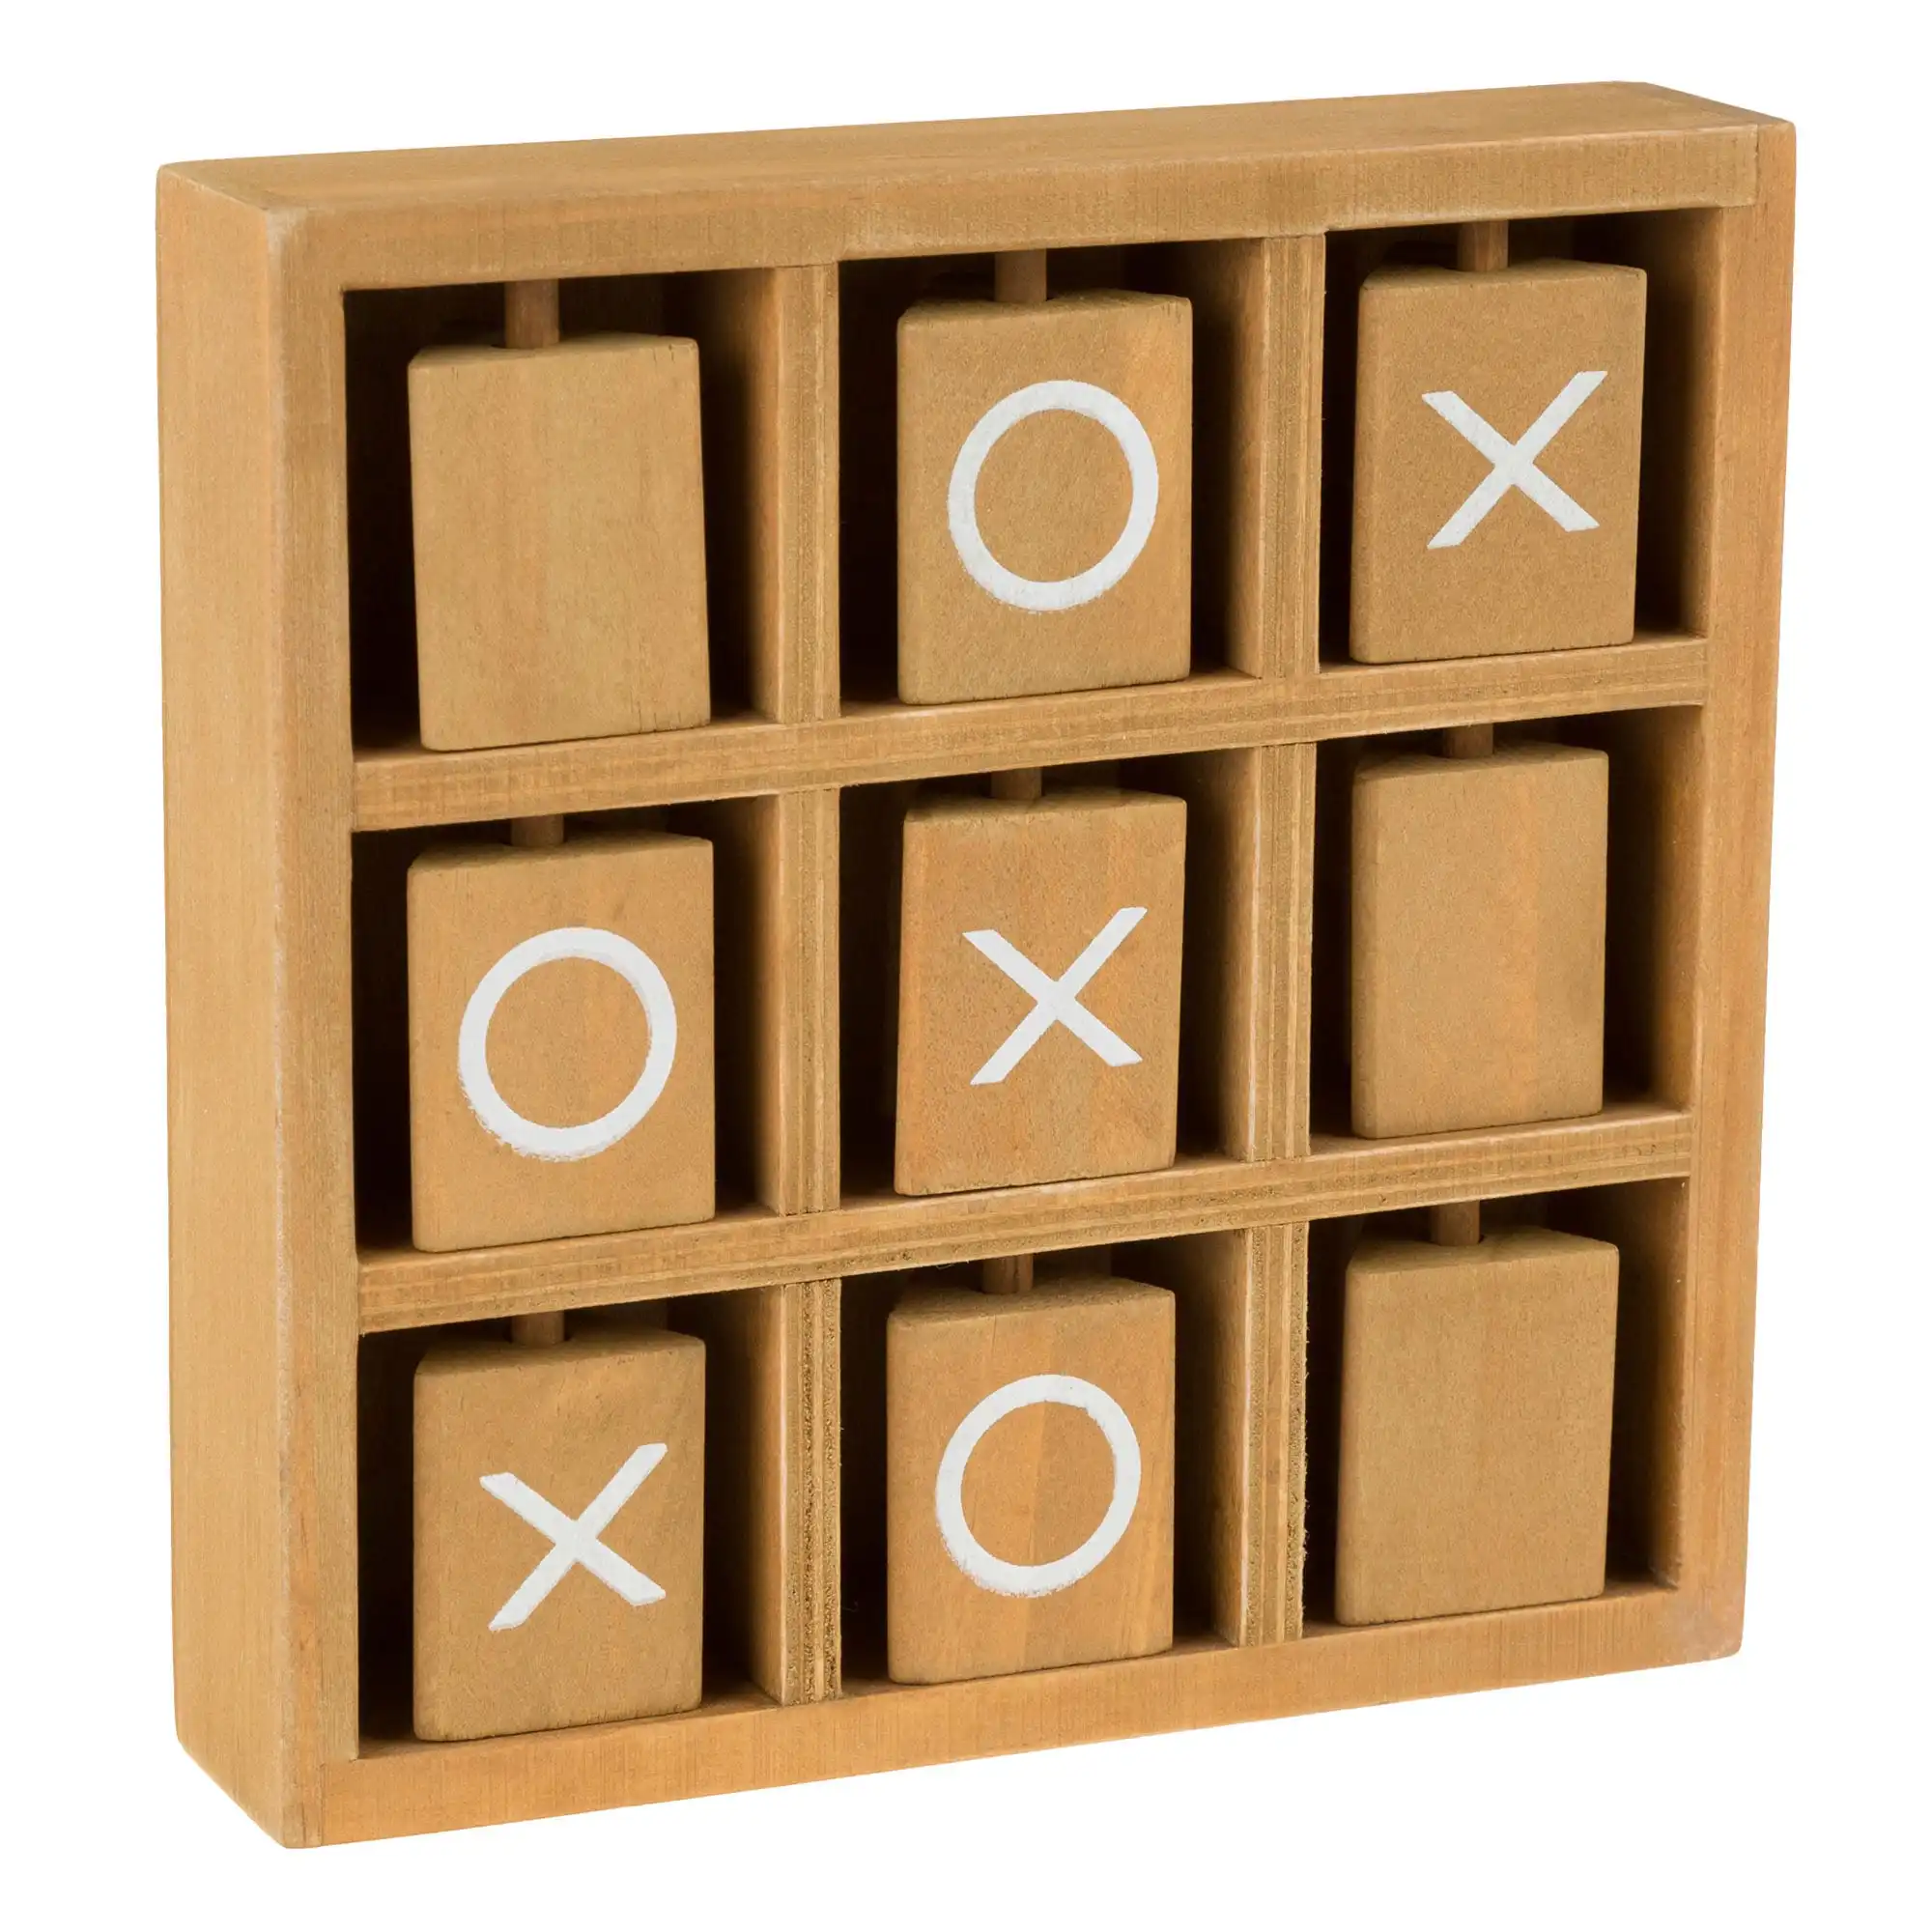 

Tic-Tac-Toe kid Small Wooden Travel Game toy Traveling Board Game